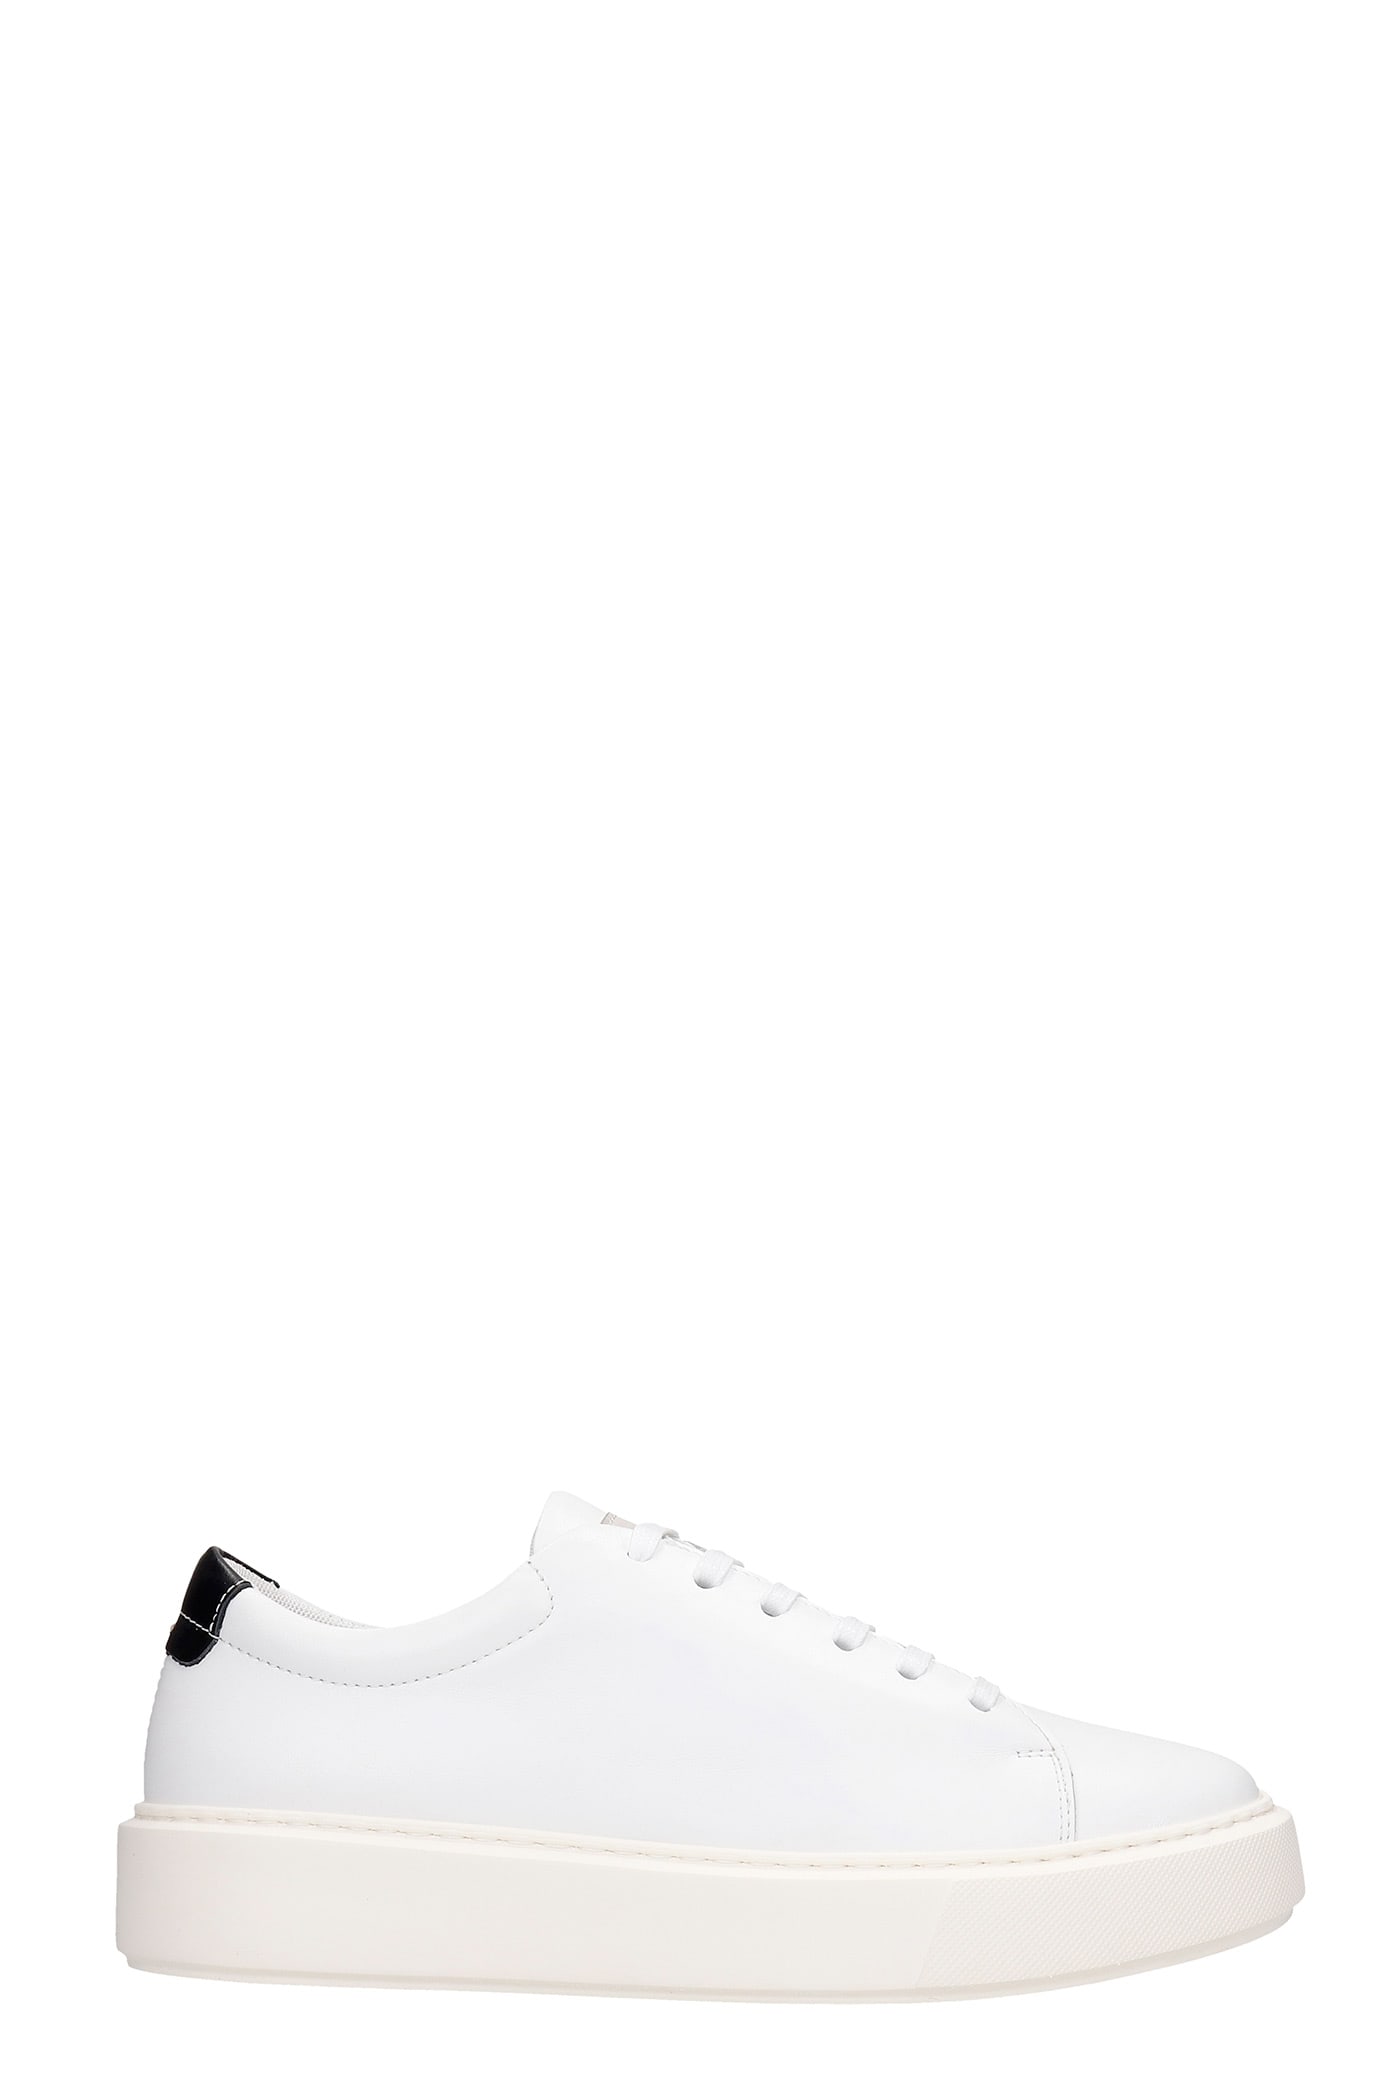 Low Brand Shelby Sneakers In White Leather